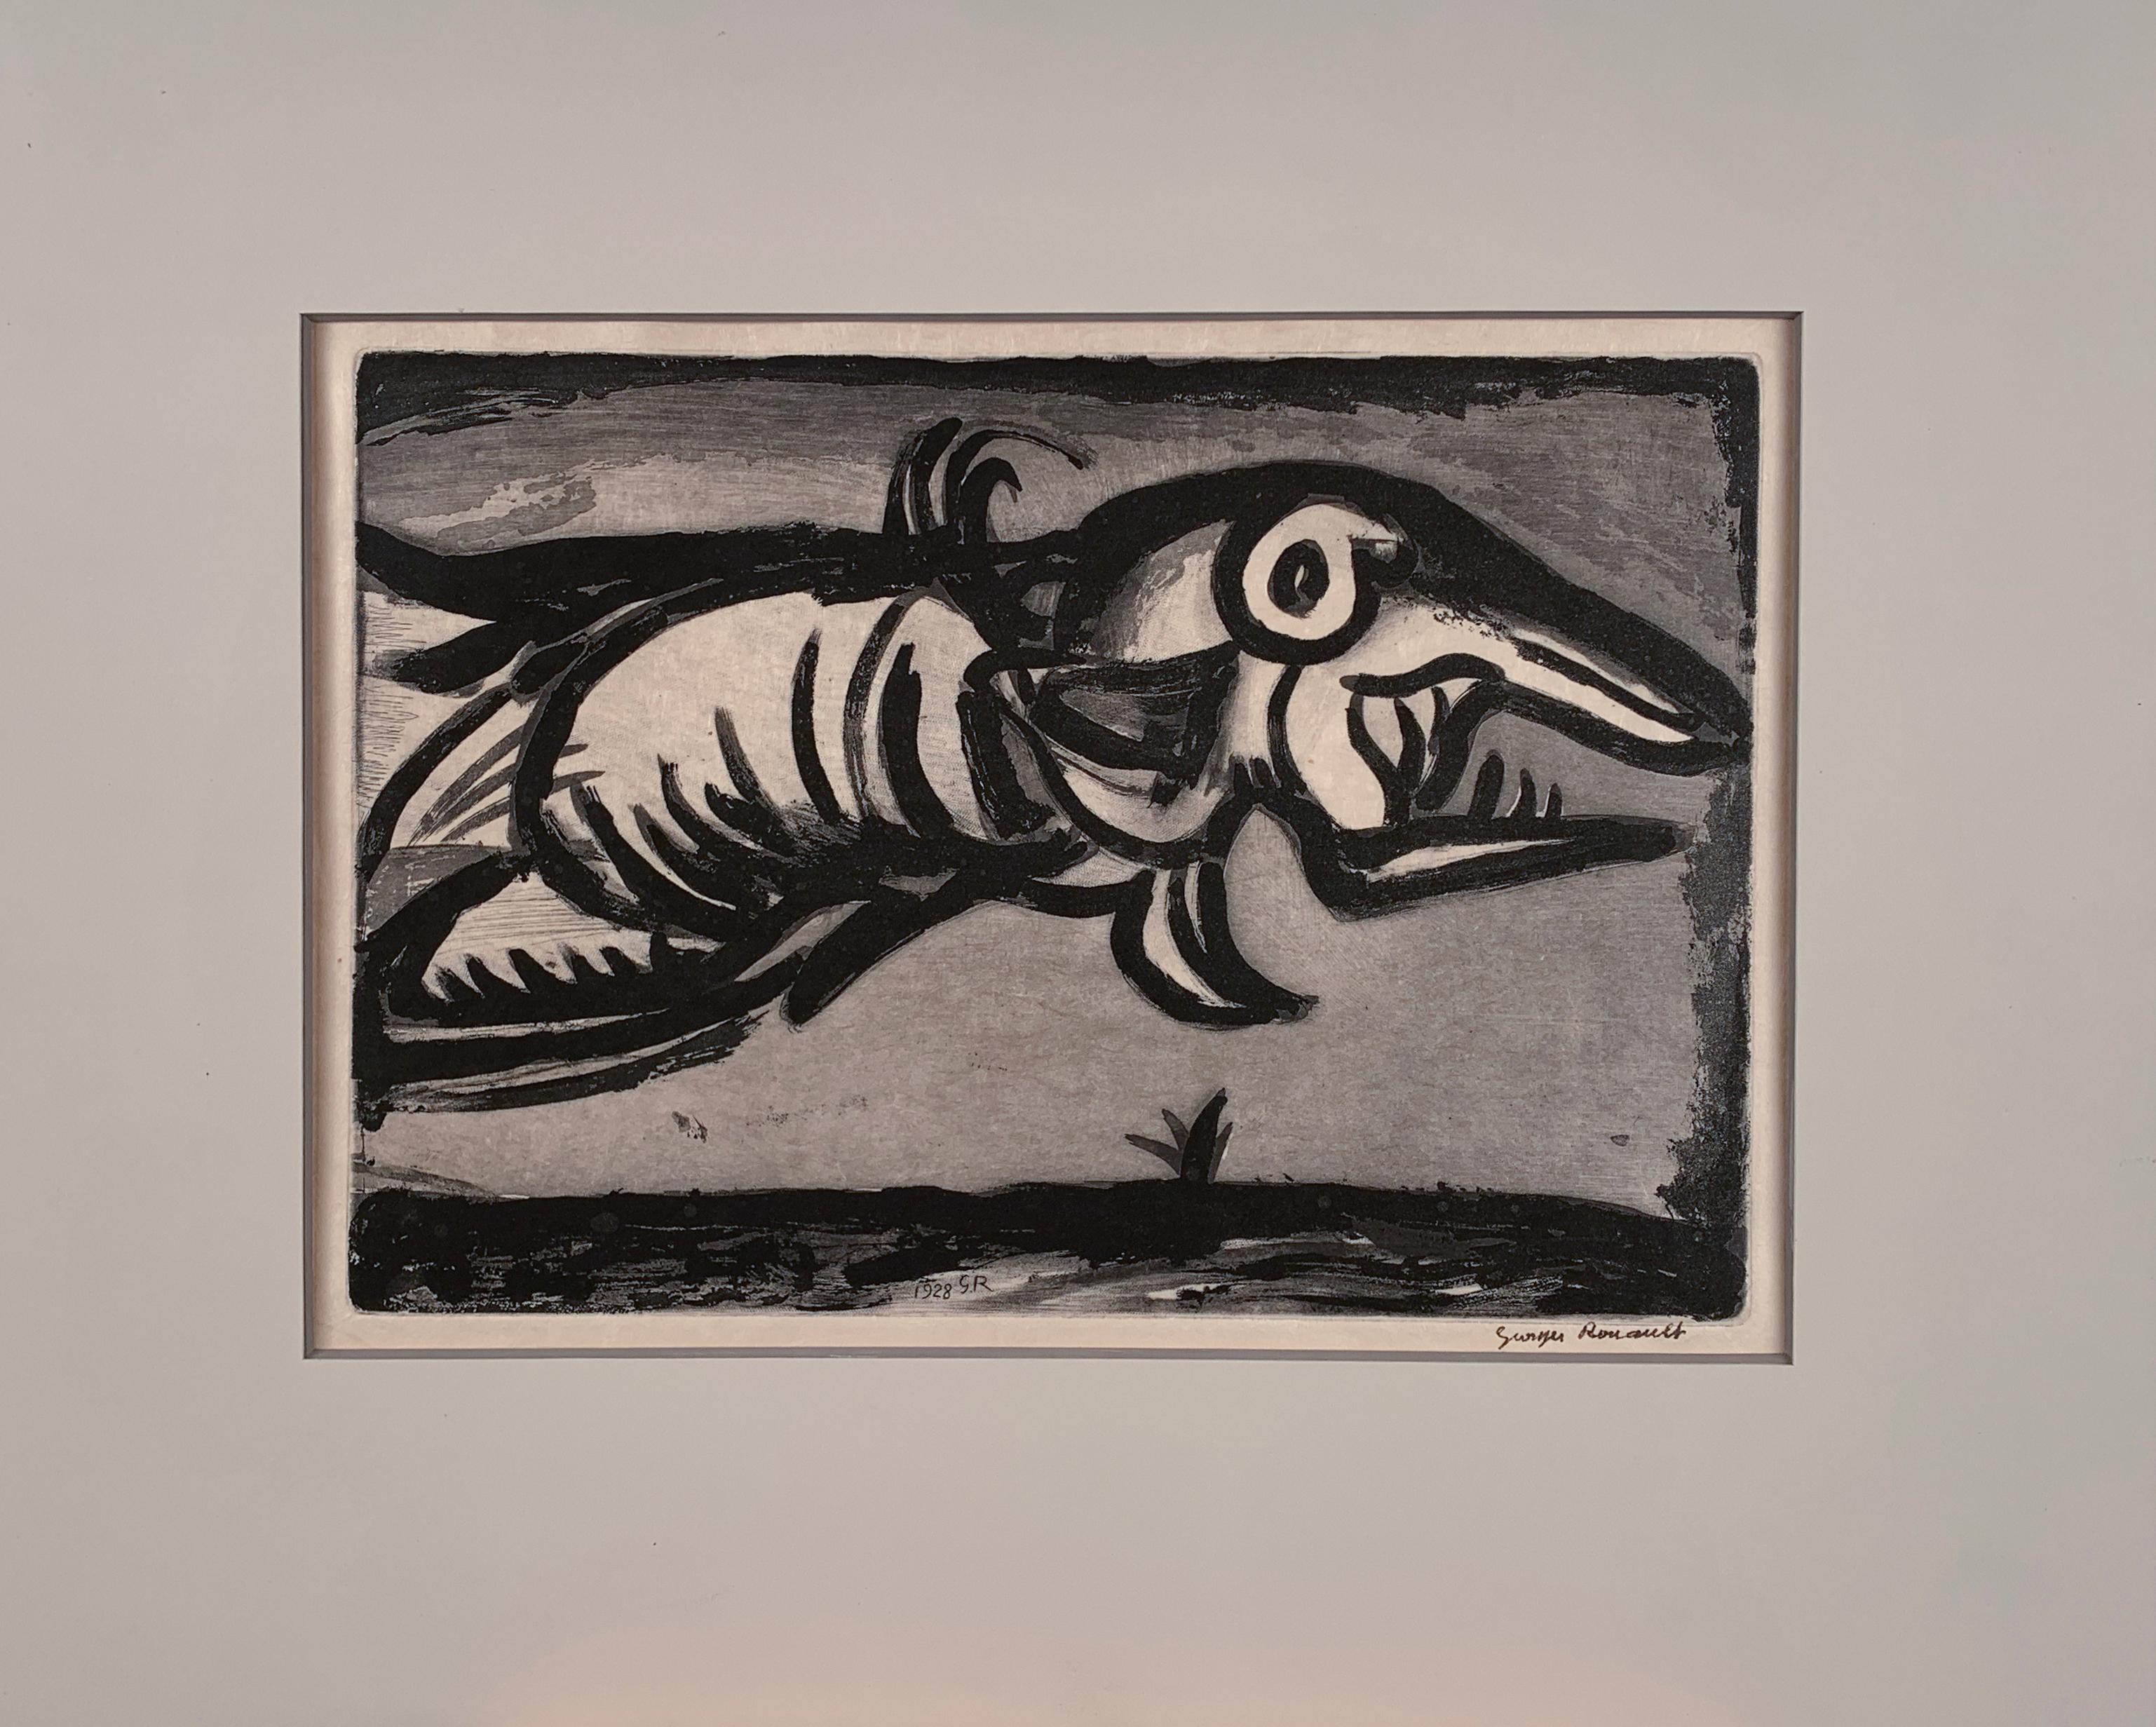 Georges Rouault Animal Print - "Dragon Volant" (Flying Dragon) by Georges Roulault